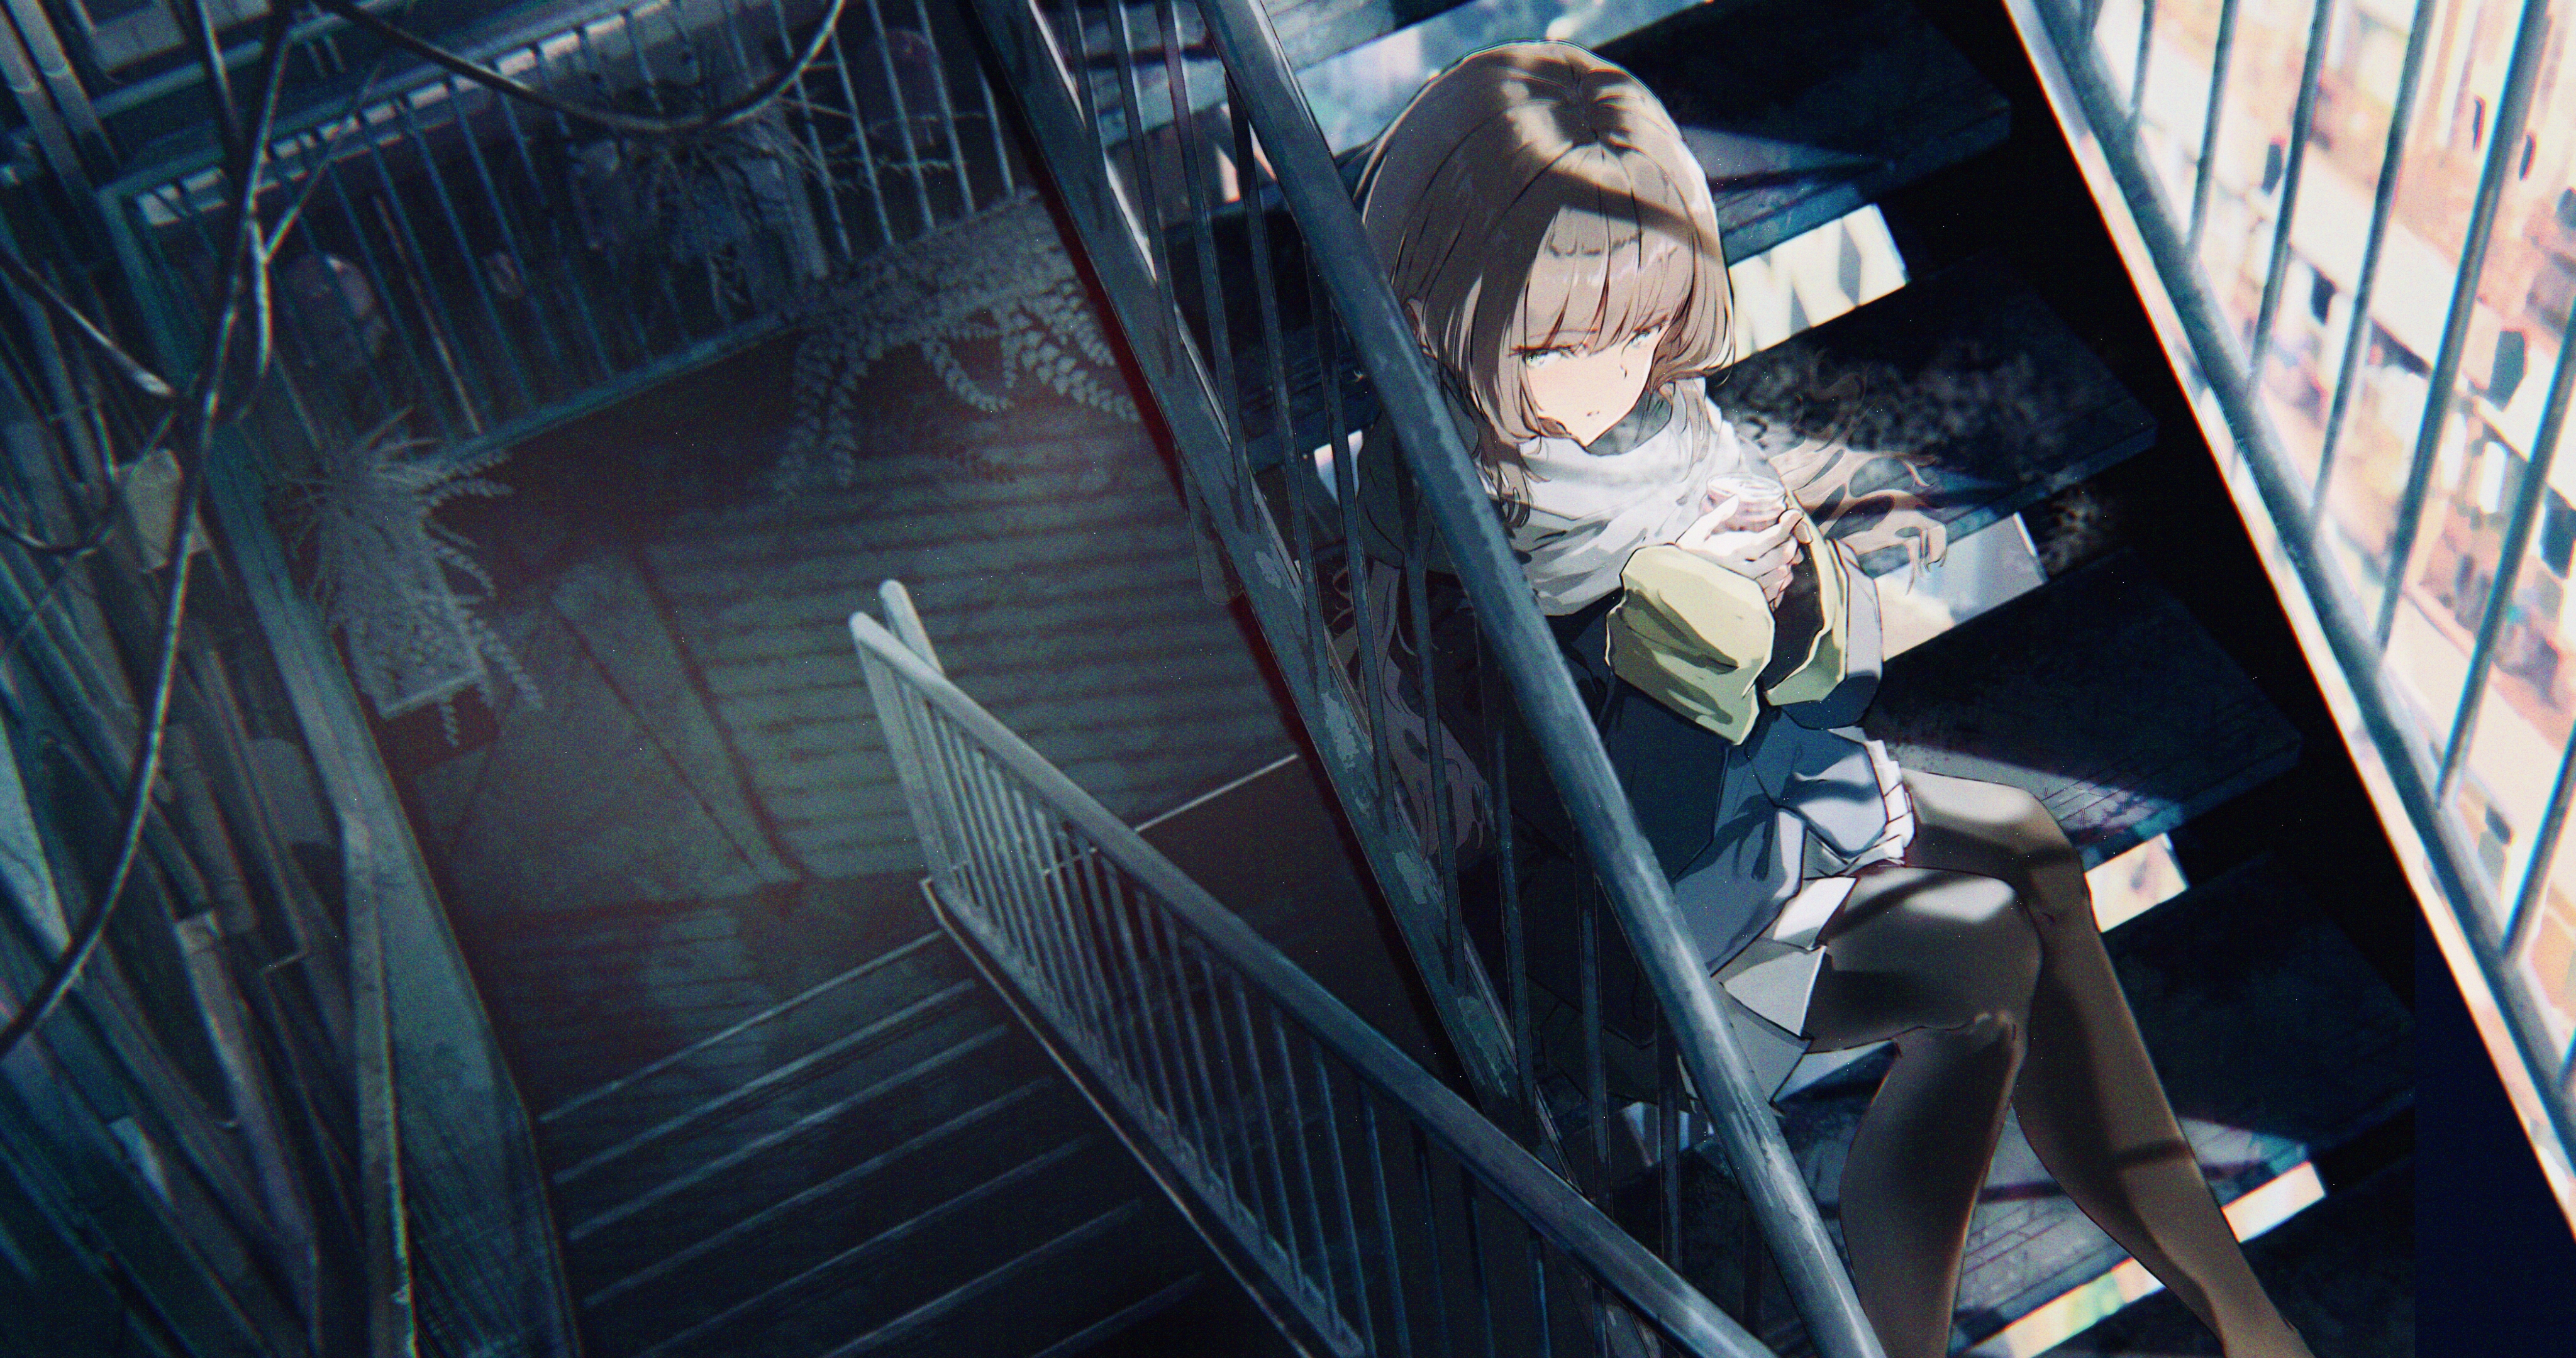 Anime 4096x2160 anime anime girls stairs brunette long hair flowerpot wires scarf can city N.S